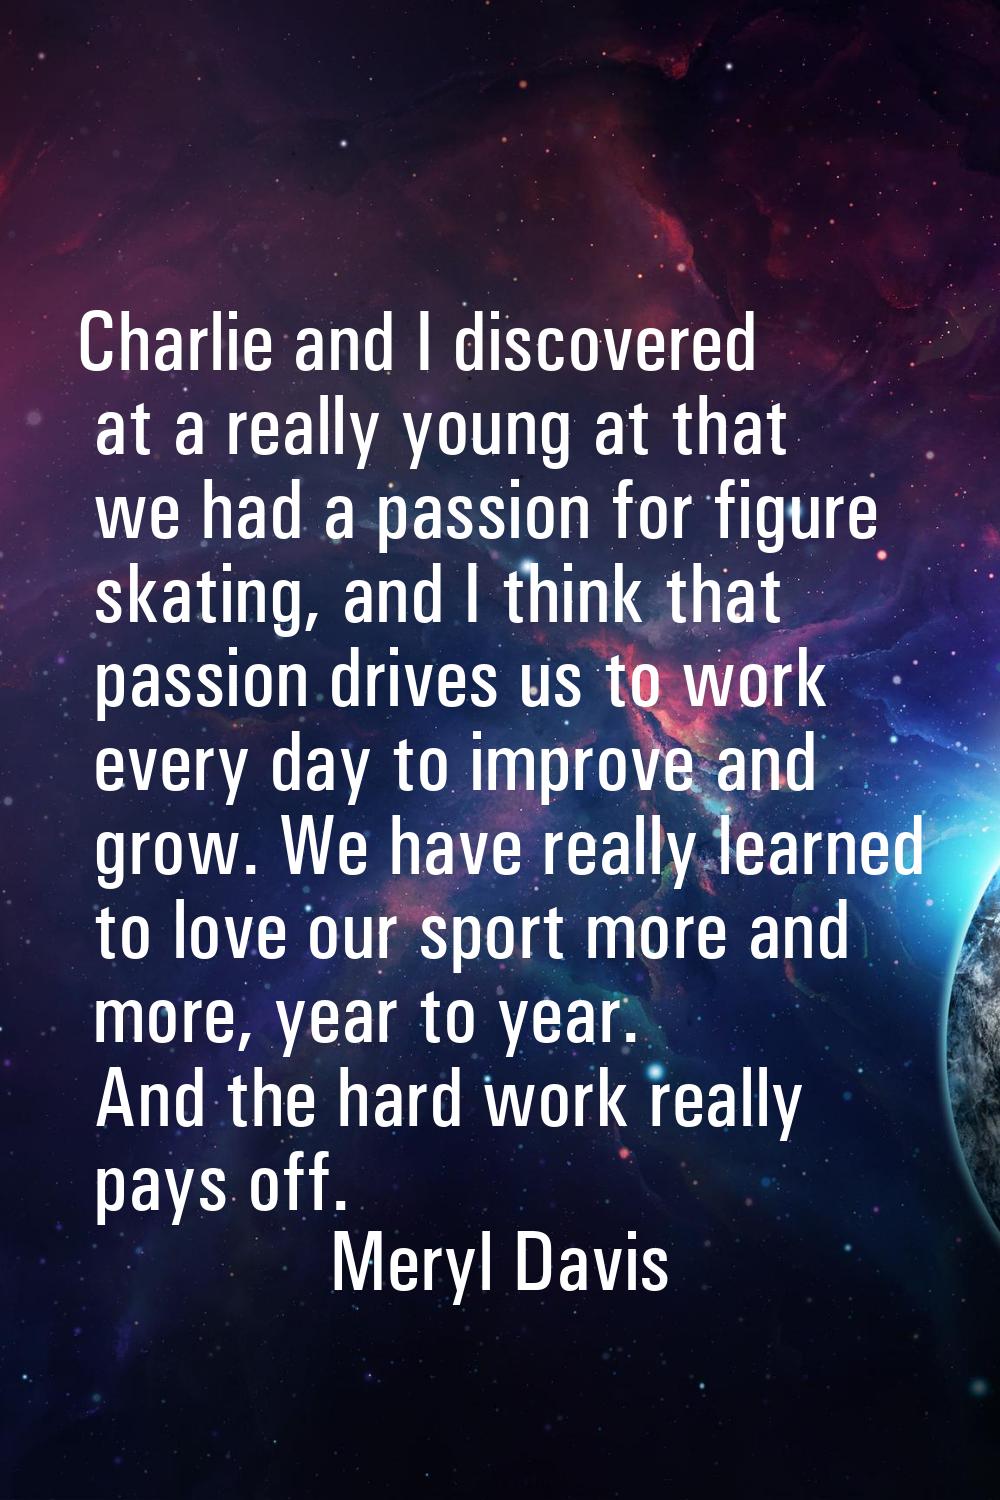 Charlie and I discovered at a really young at that we had a passion for figure skating, and I think